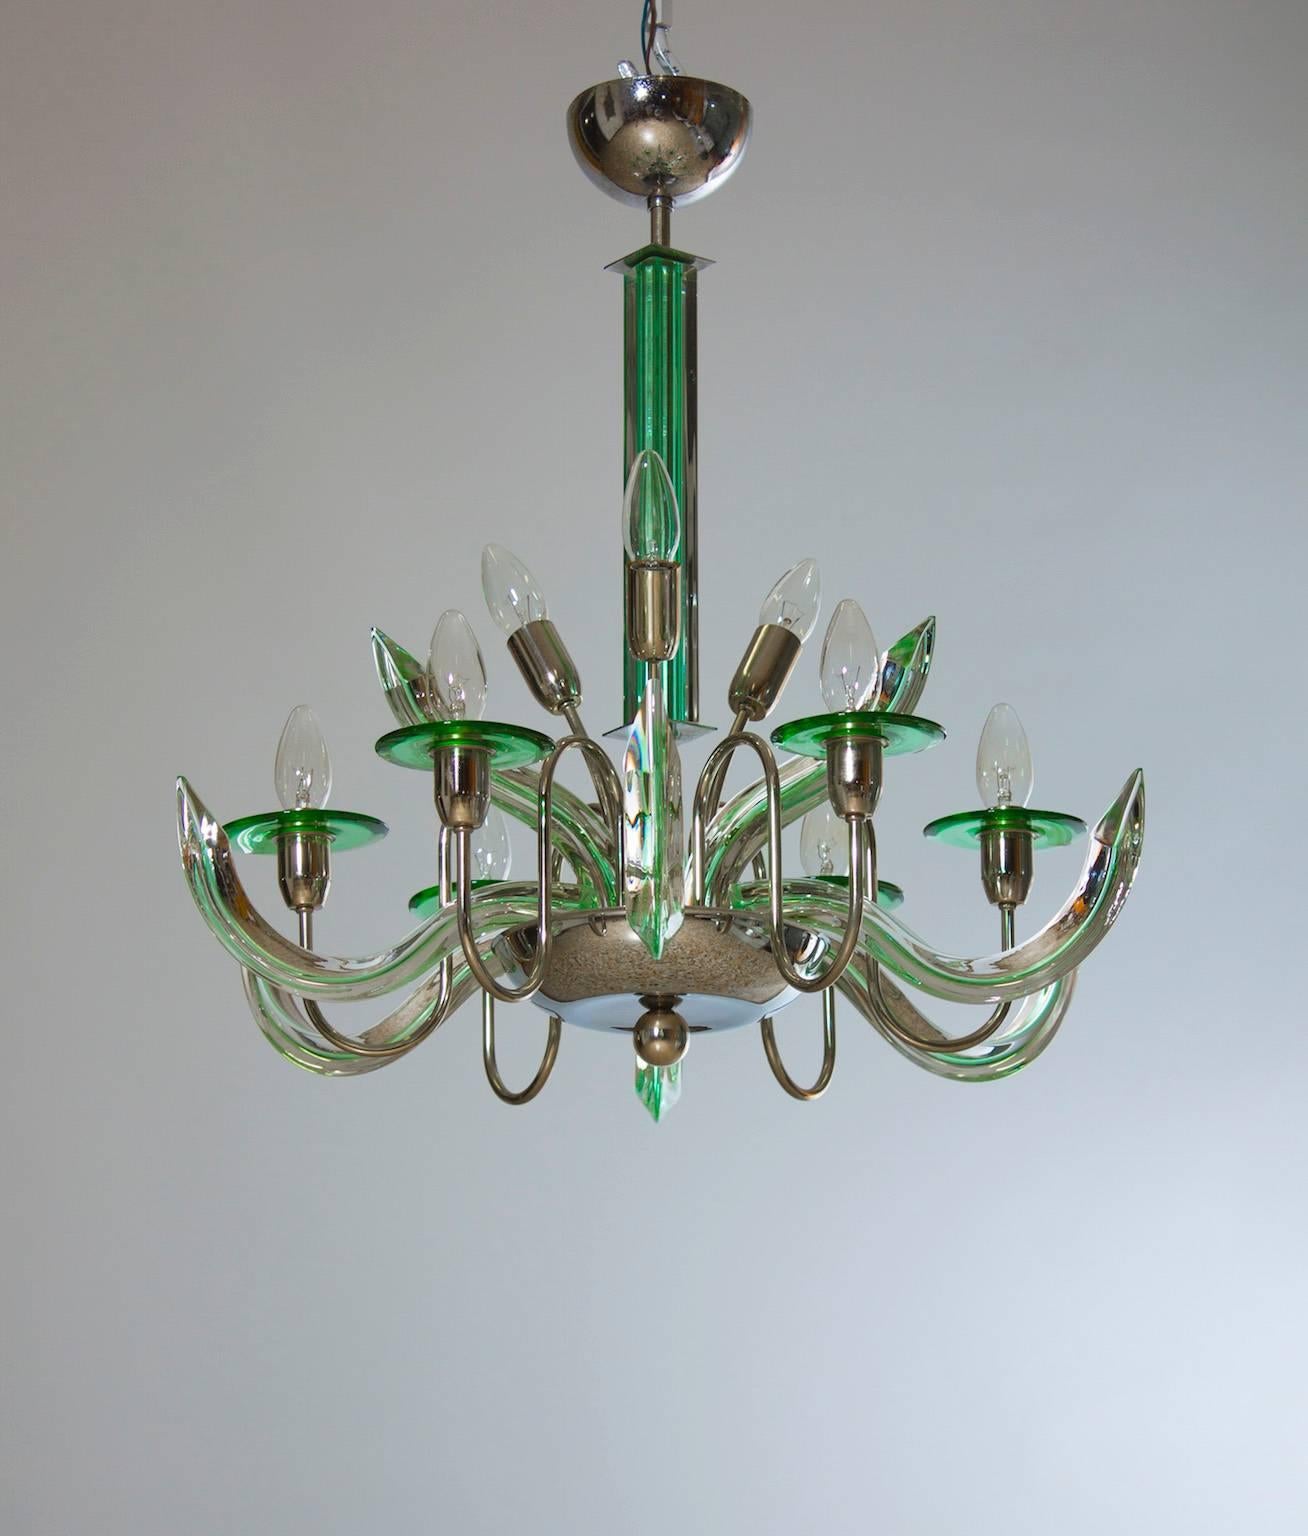 Hand-Crafted Italian Triedro Chandelier, Attributed to Camer Glass, circa 1960